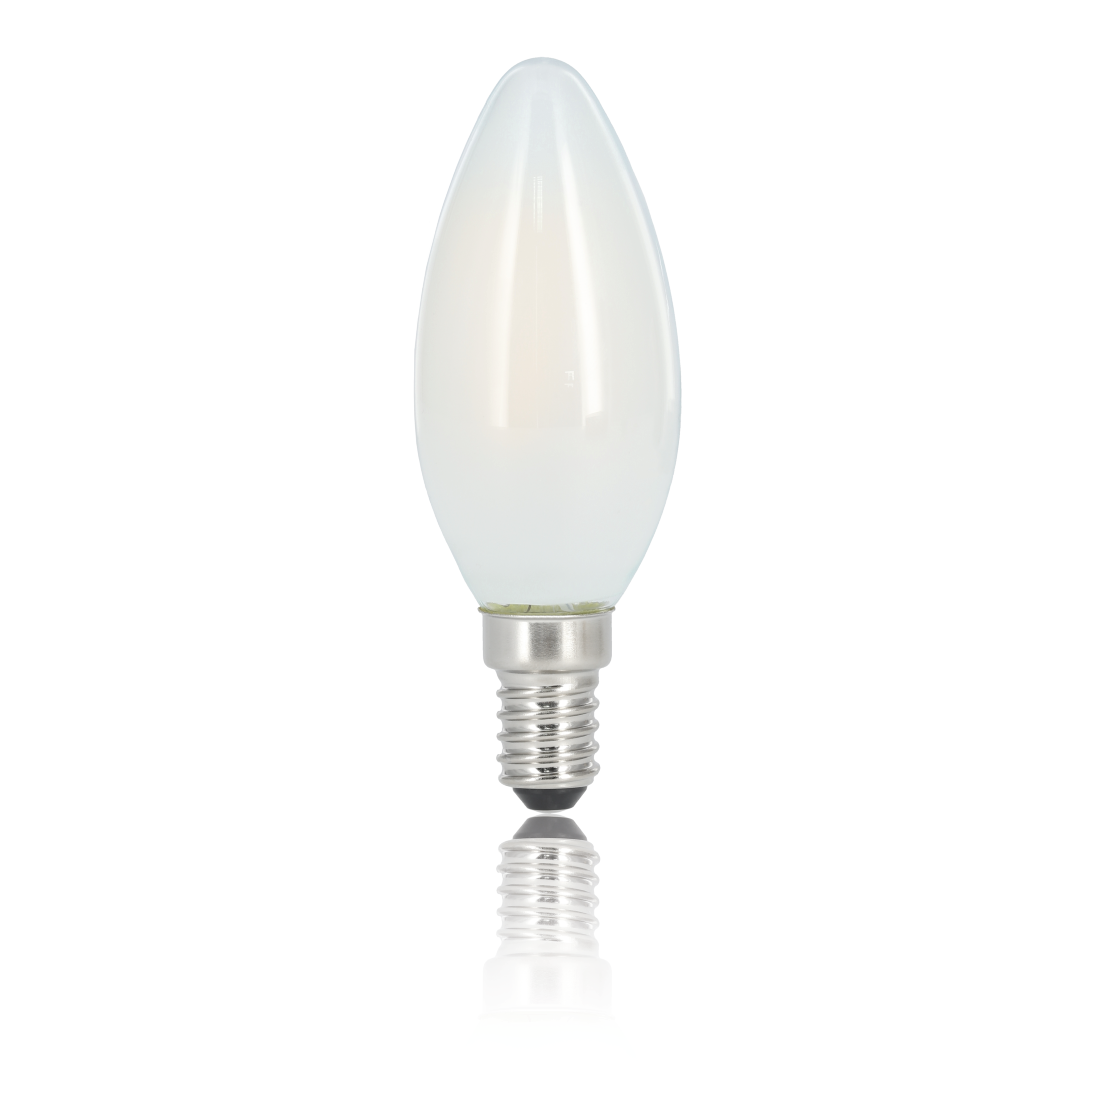 abx2 High-Res Image 2 - Xavax, LED Filament, E14, 470 lm Replaces 40 W, Candle Bulb, Daylight, matt